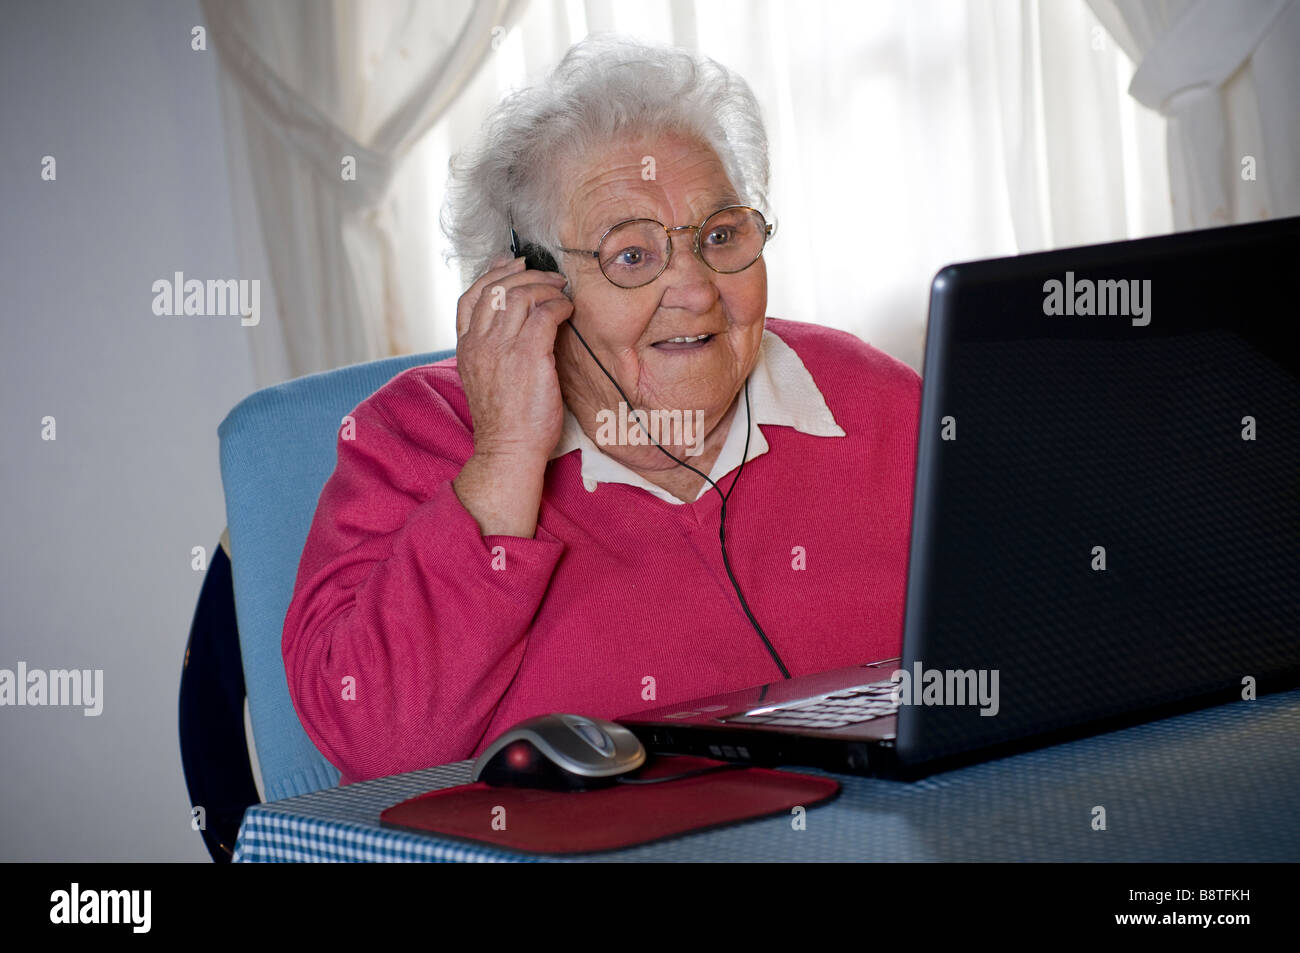 Senior elderly lady and laptop computer isolating covid-19 & headphones amazed by video chat zoom with family friends on her laptop computer screen Stock Photo